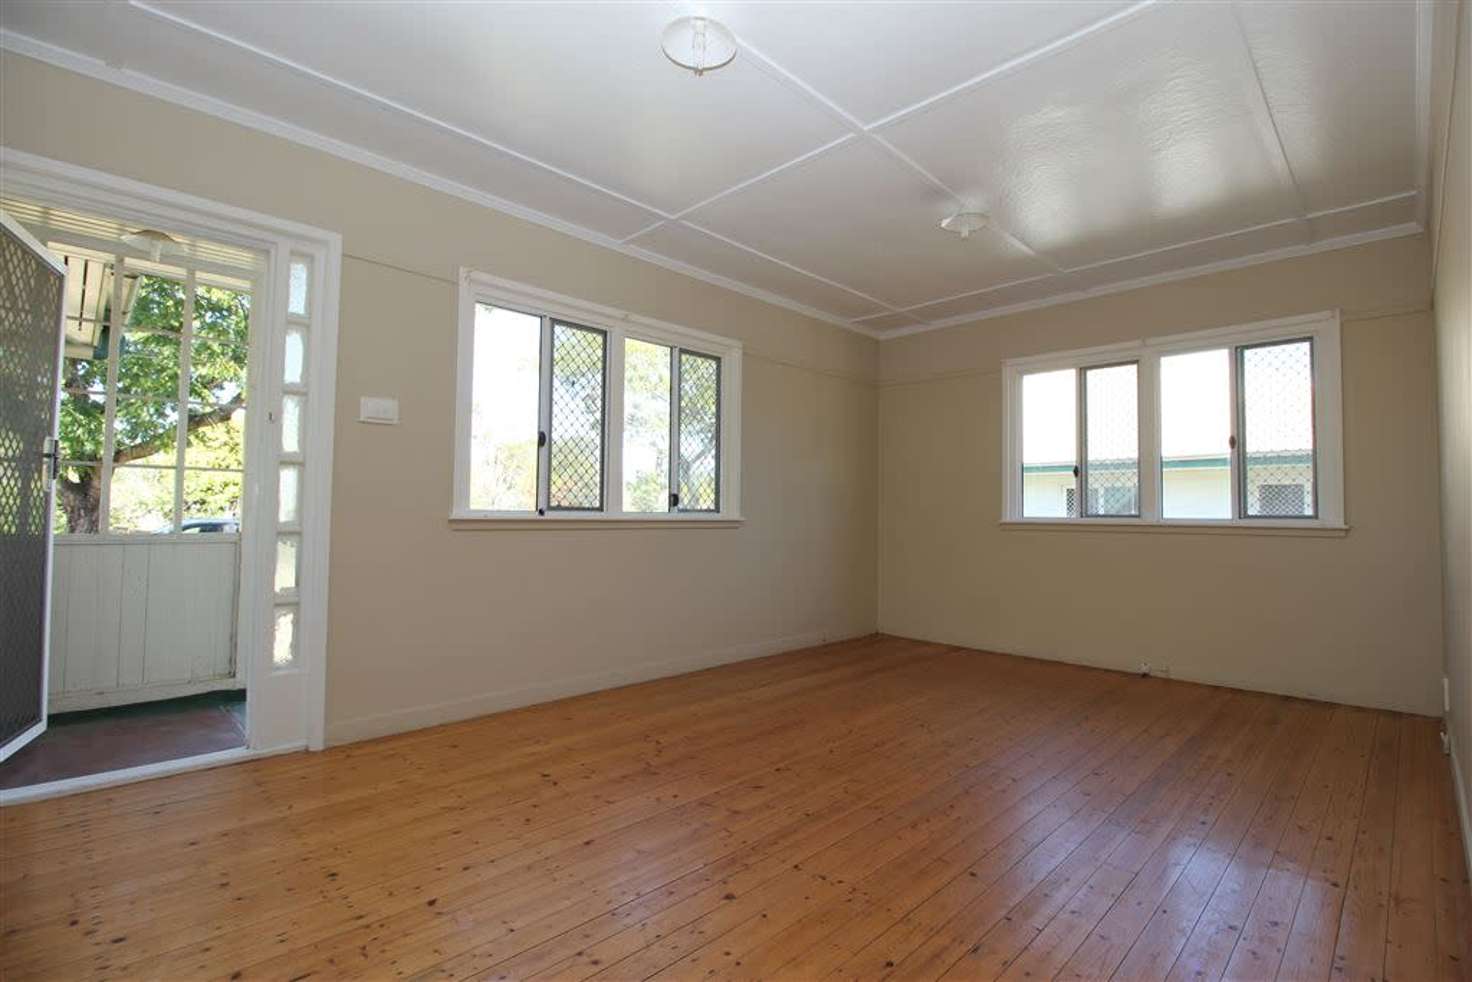 Main view of Homely house listing, 12 Babbidge St, Coopers Plains QLD 4108